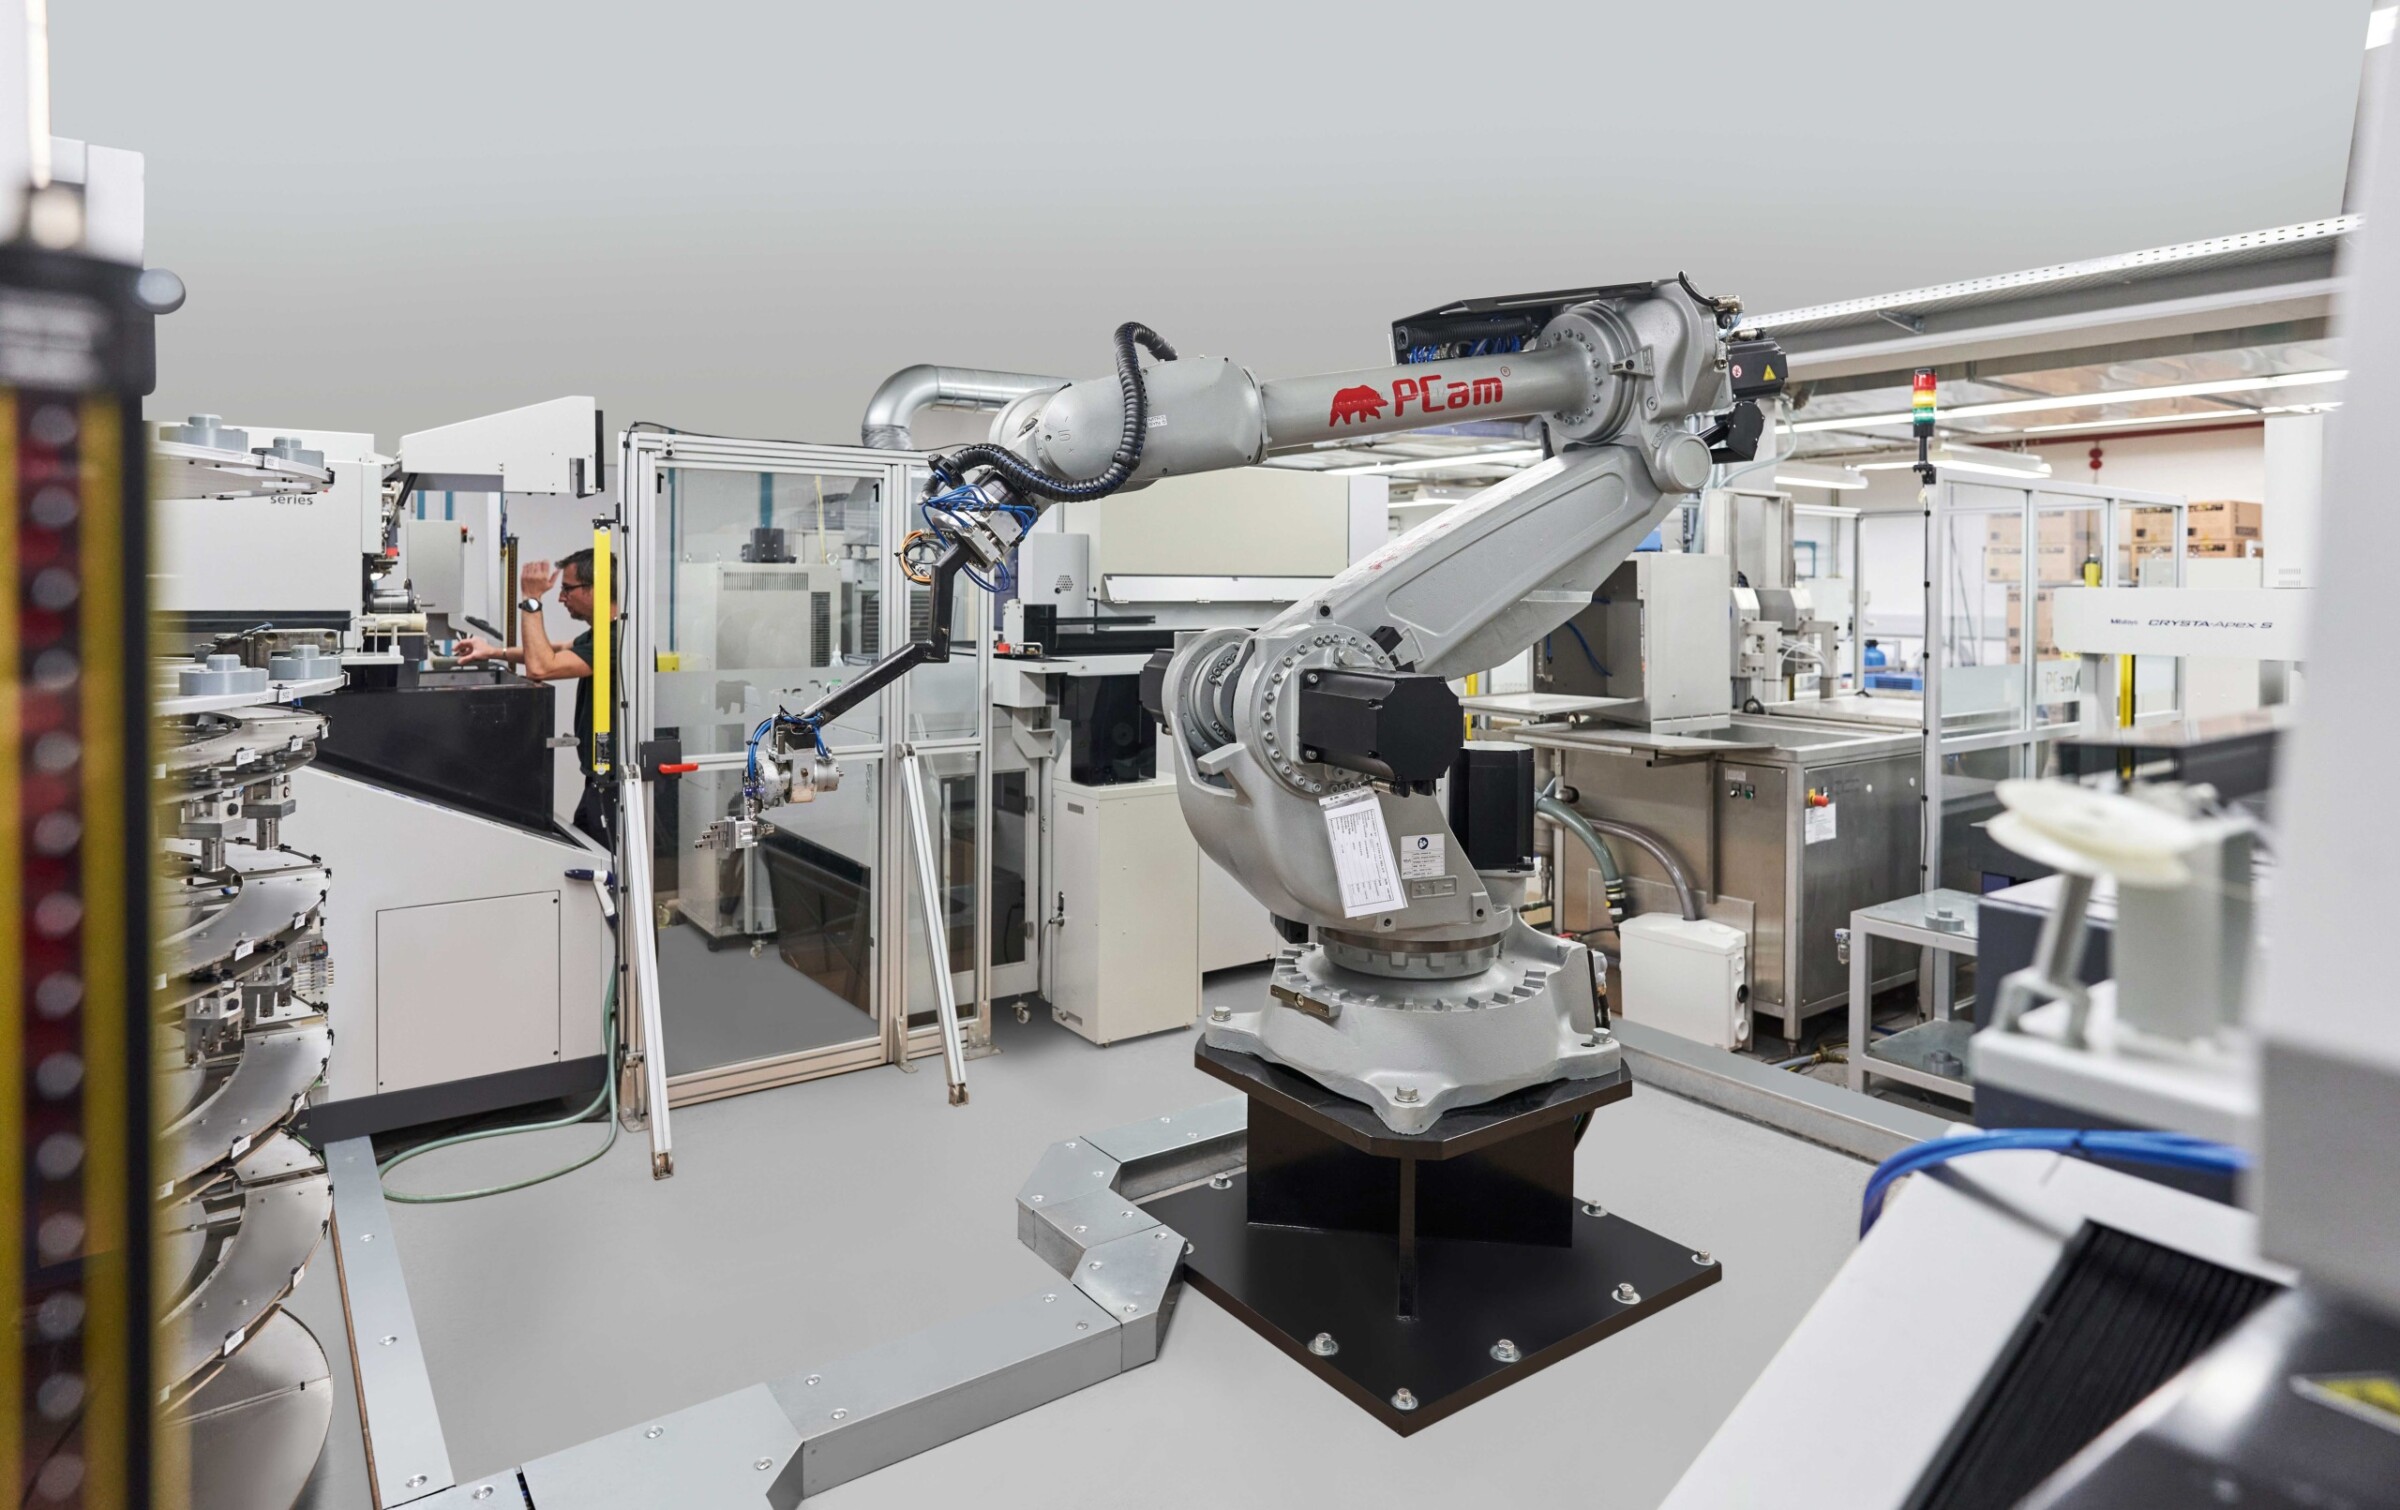 One robot for four. Full automation in electrical discharge machining.